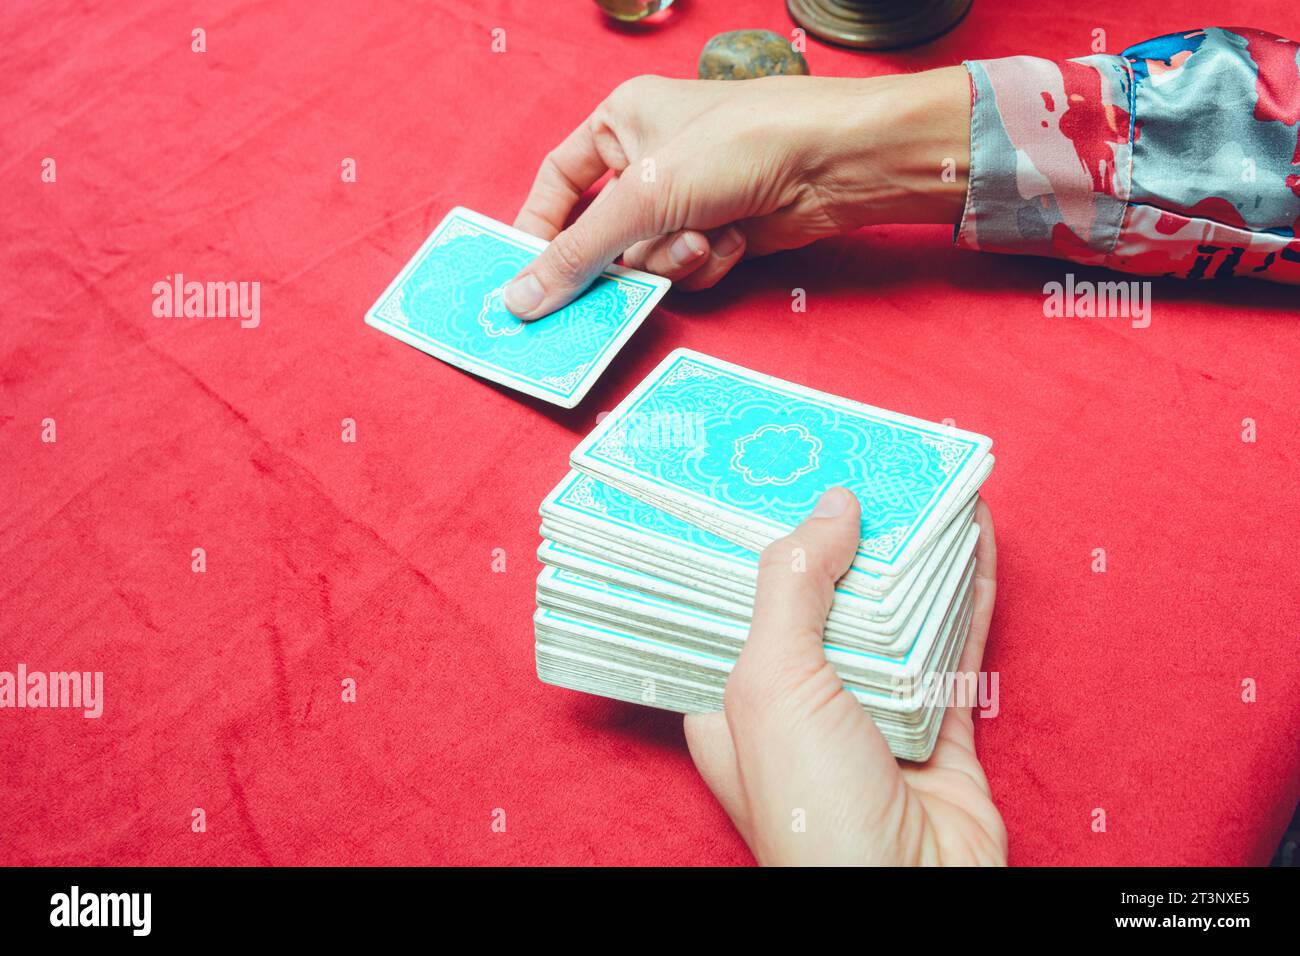 first person top view of unrecognizable caucasian woman placing blue tarot card on table with red tablecloth, tarot concept, copy space Stock Photo